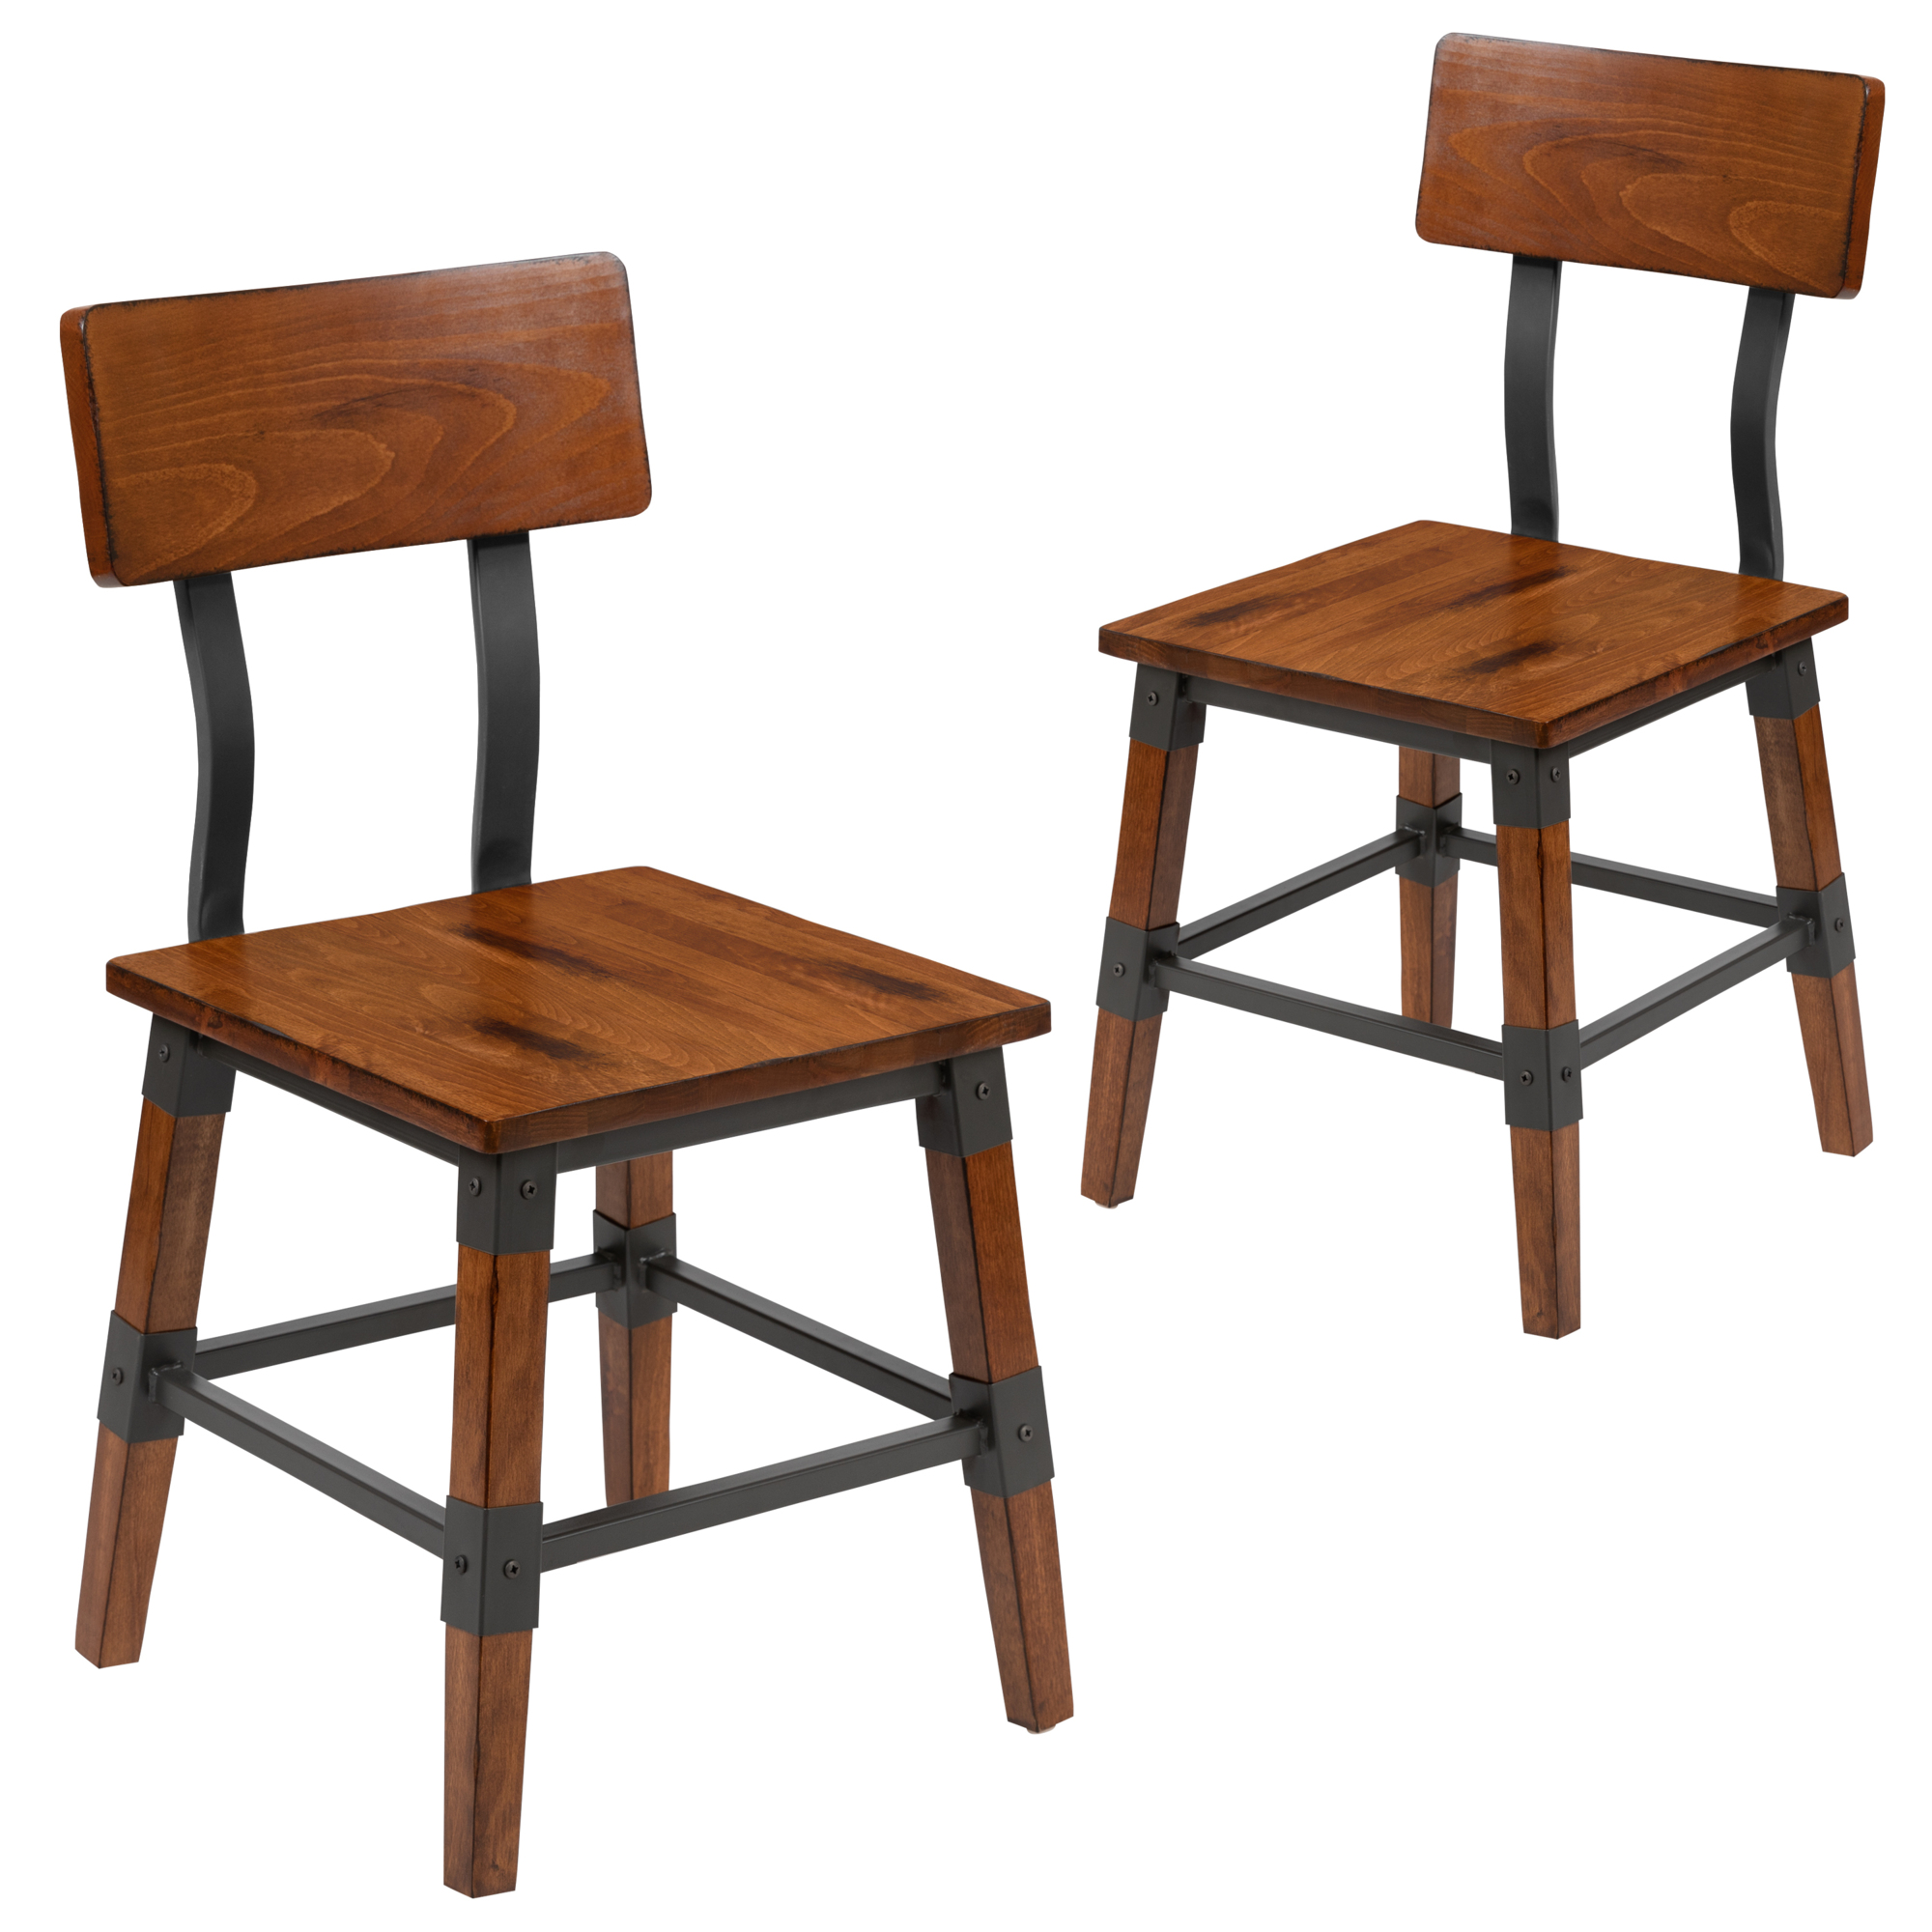 Flash Furniture, 2 PK Rustic Walnut Industrial Wood Dining Chair, Primary Color Brown, Included (qty.) 2, Model 2XUDGW0236